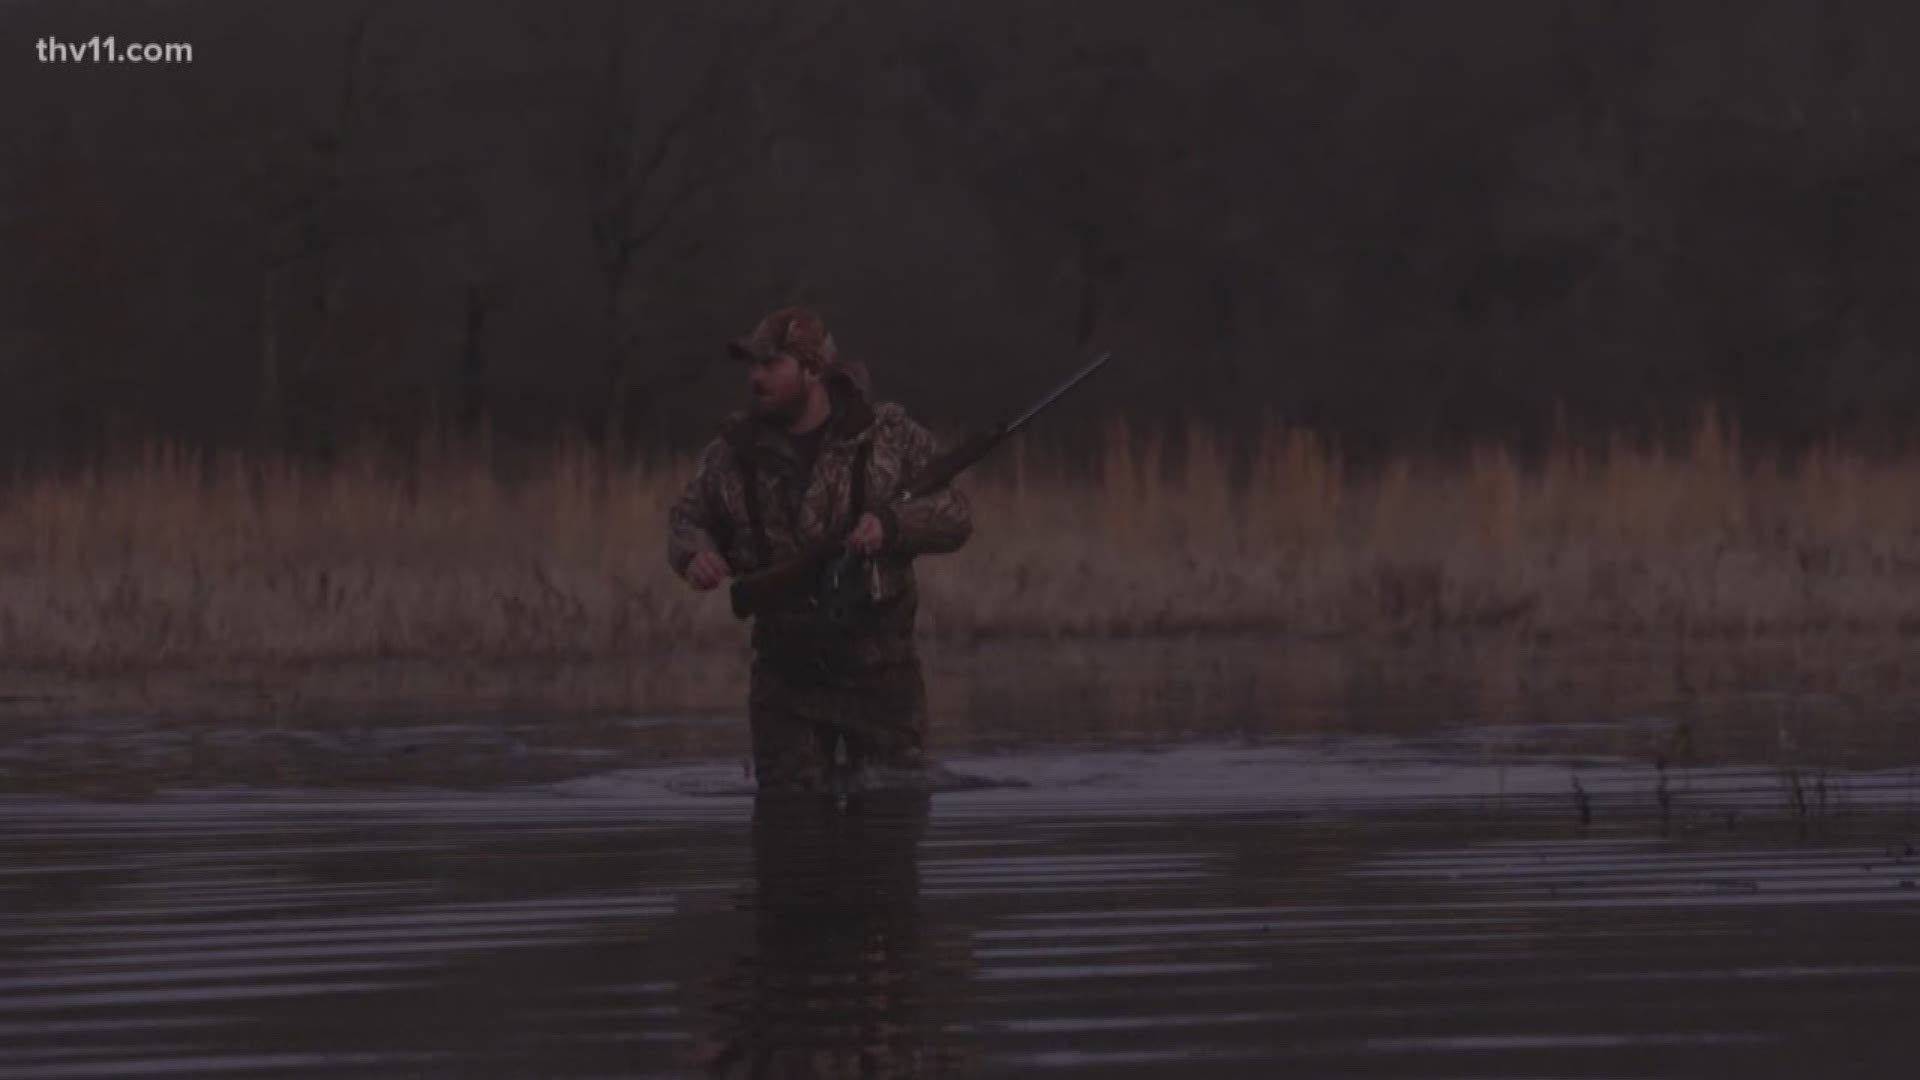 January weather could turn around disappointing duck season